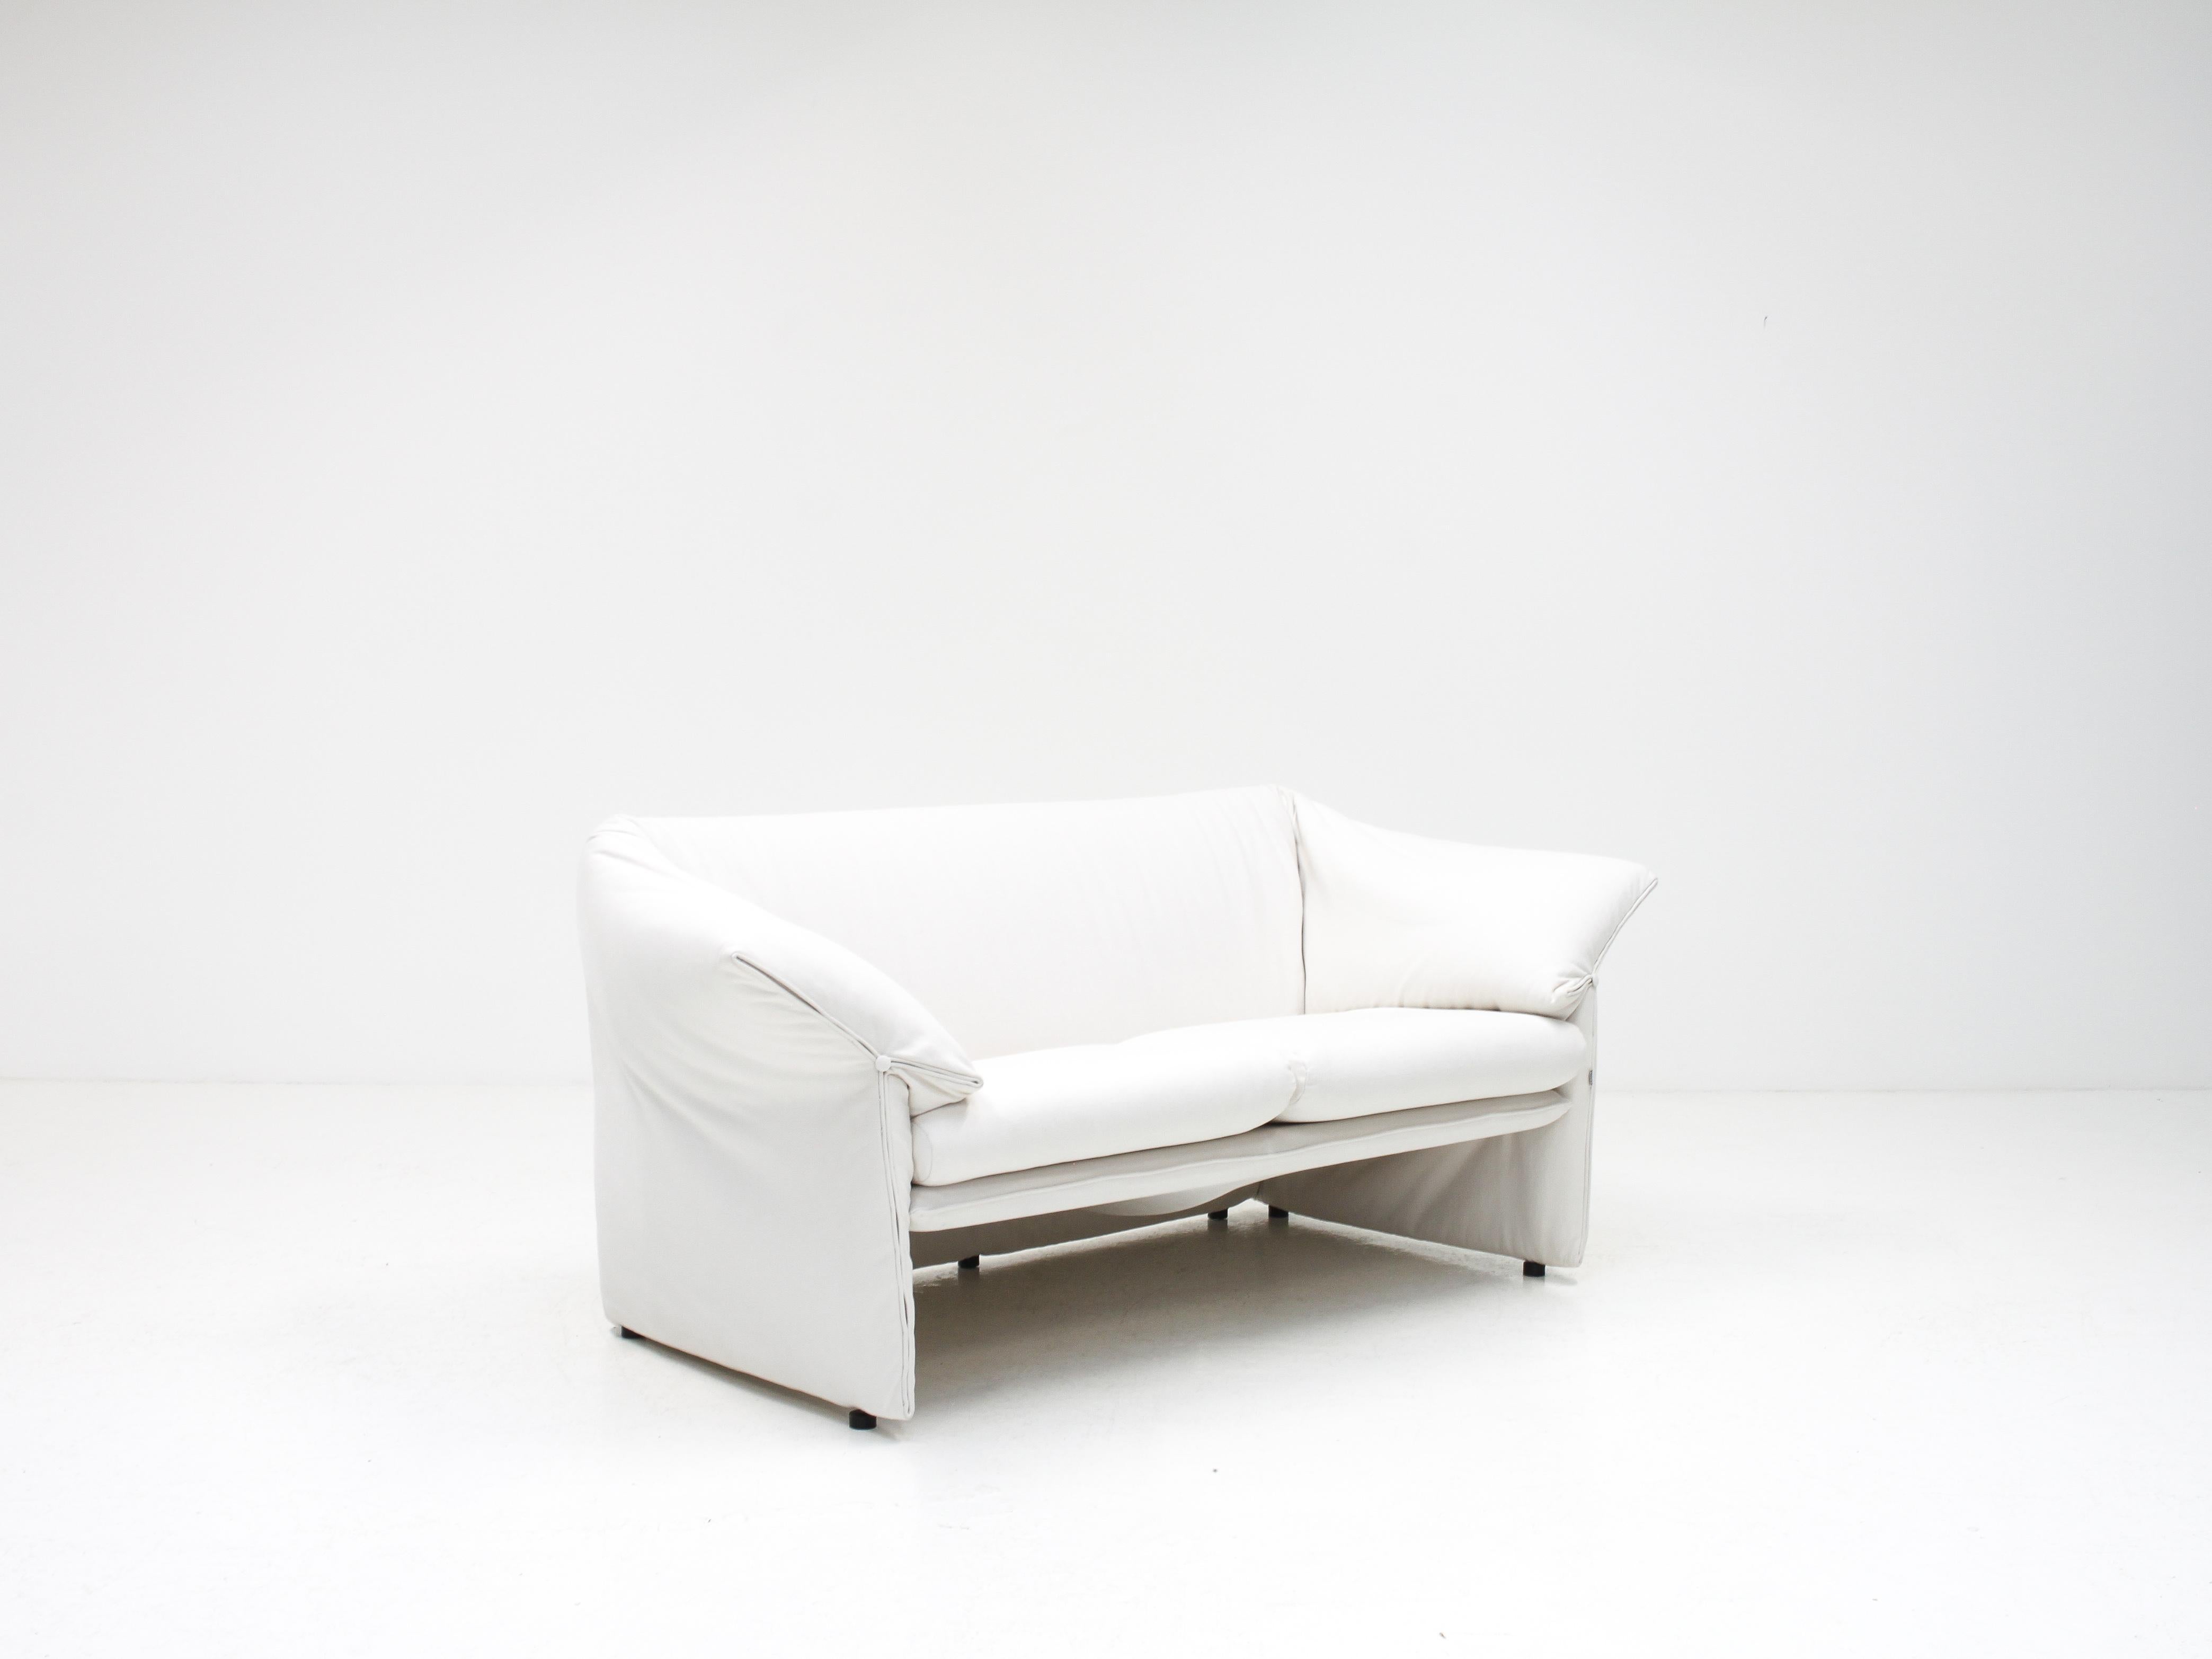  'Le Stelle' Loveseat Sofa by Mario Bellini for B&B Italia, 1974, Reupholstered 7